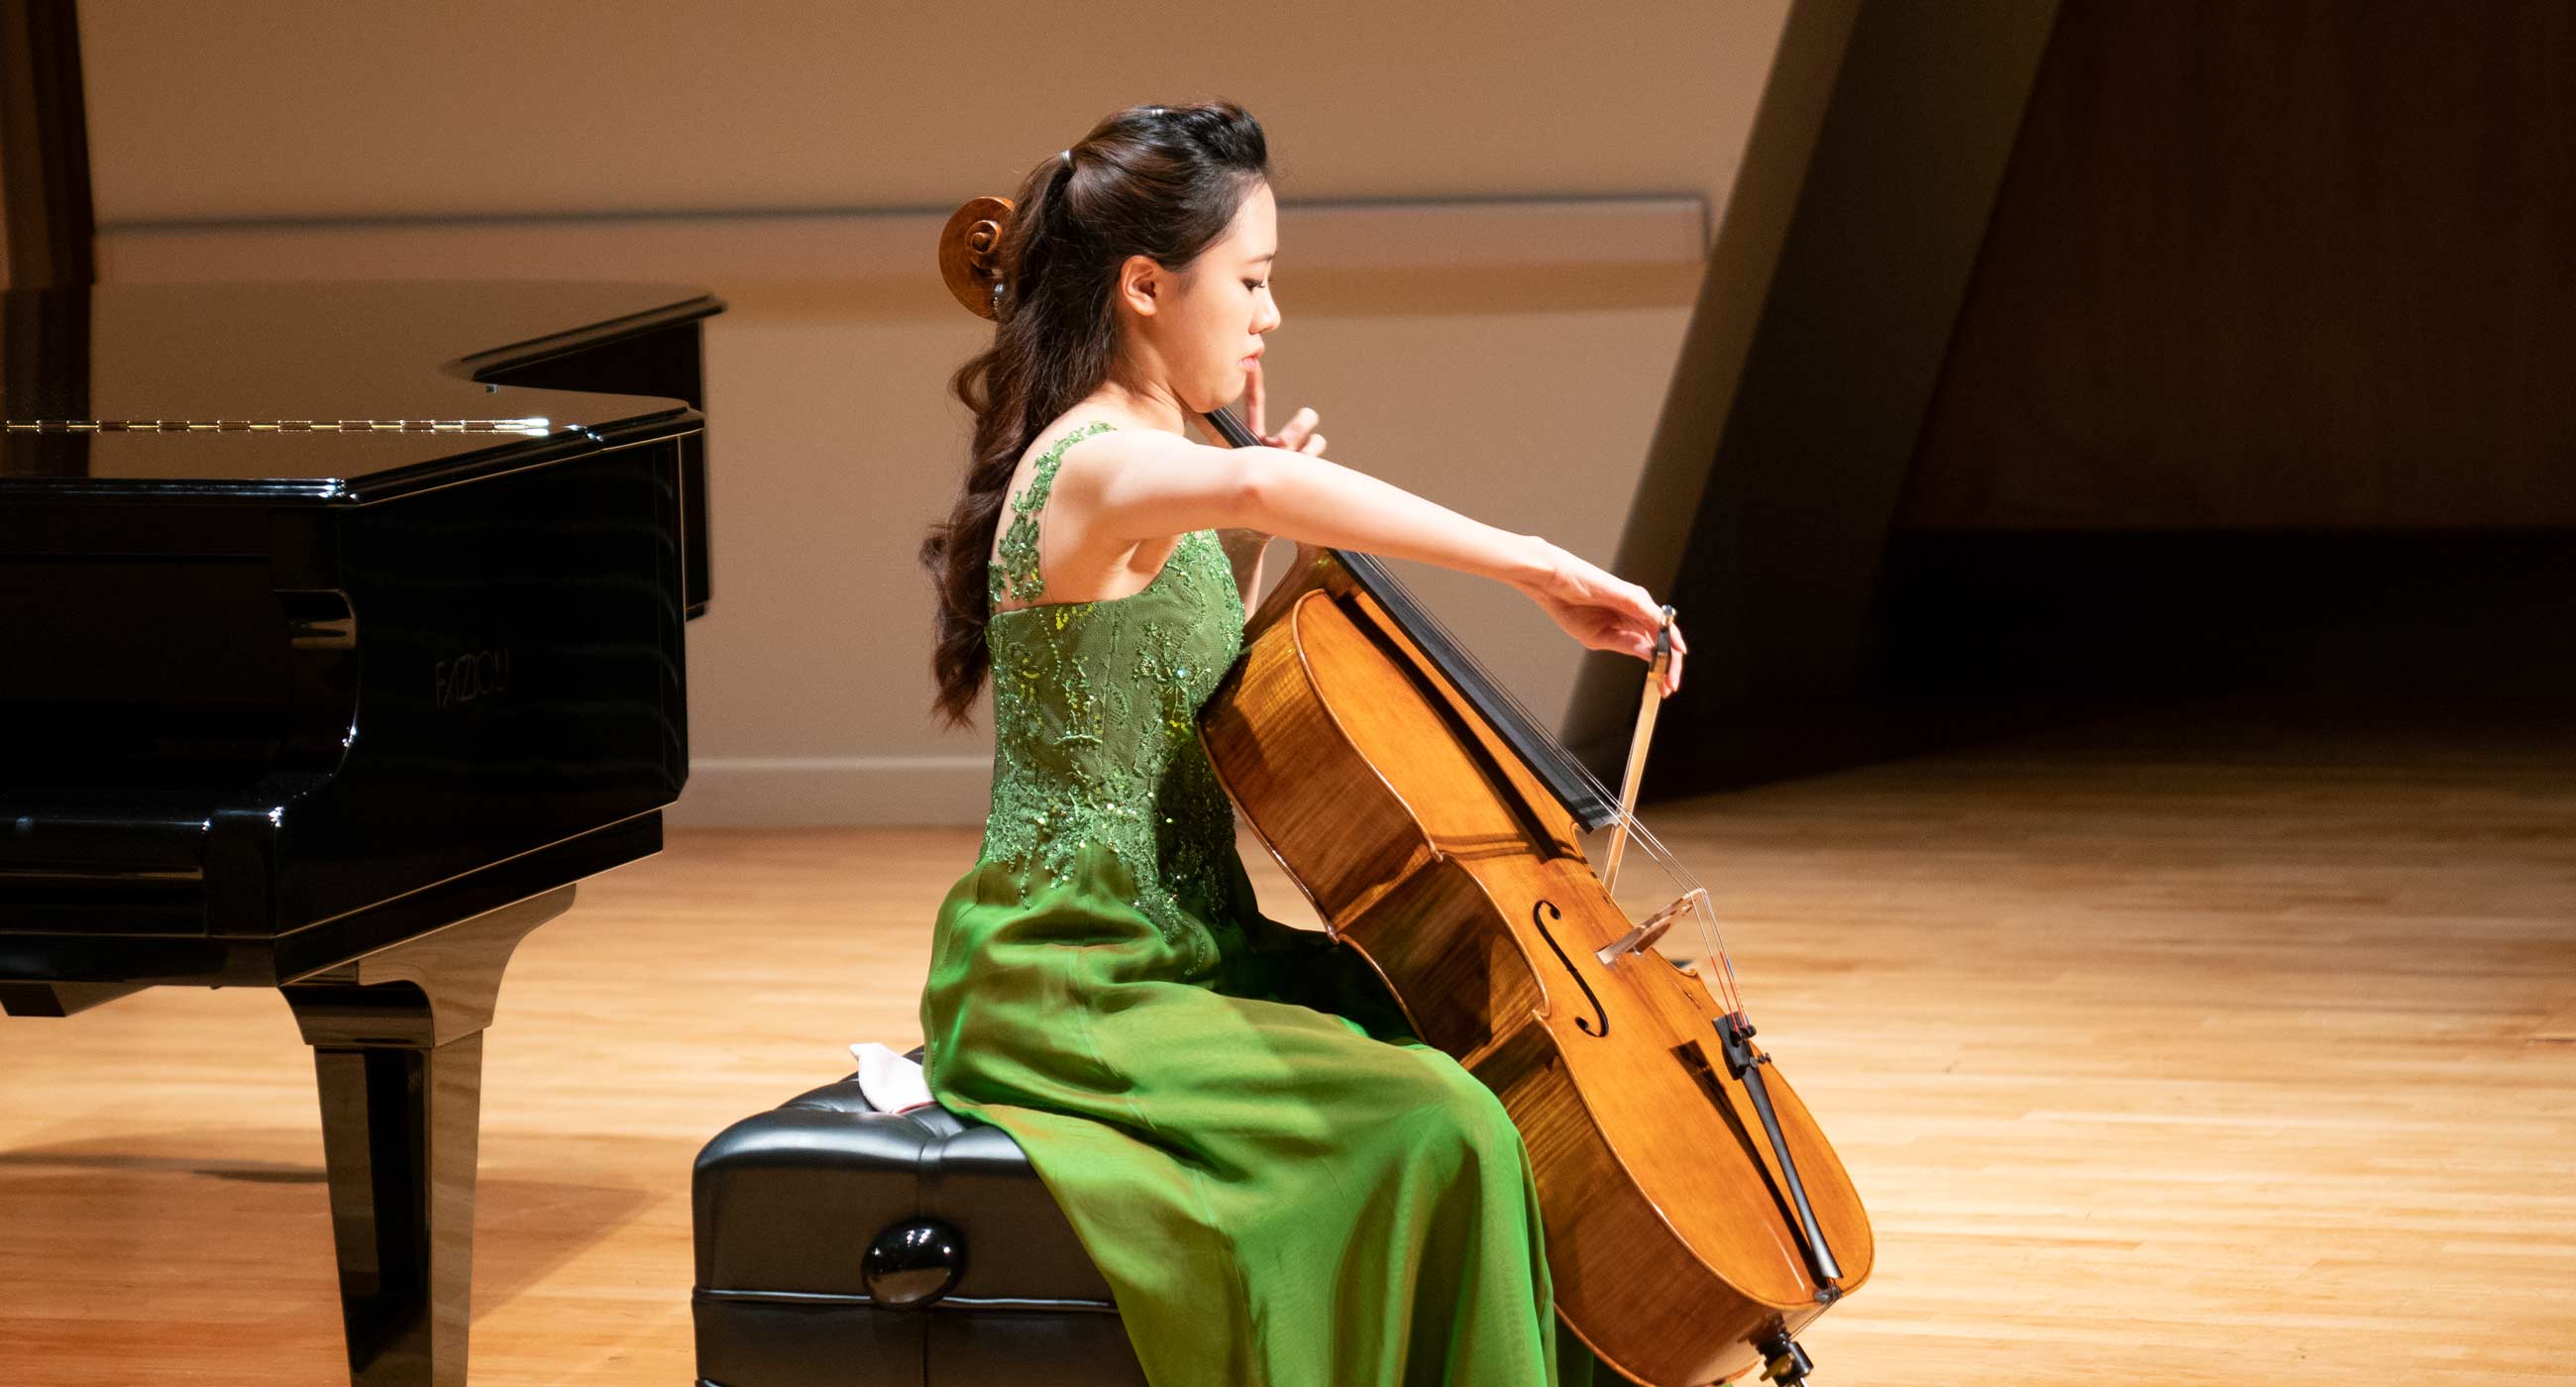 Sanga Yang in a dress playing cello in front of a piano.